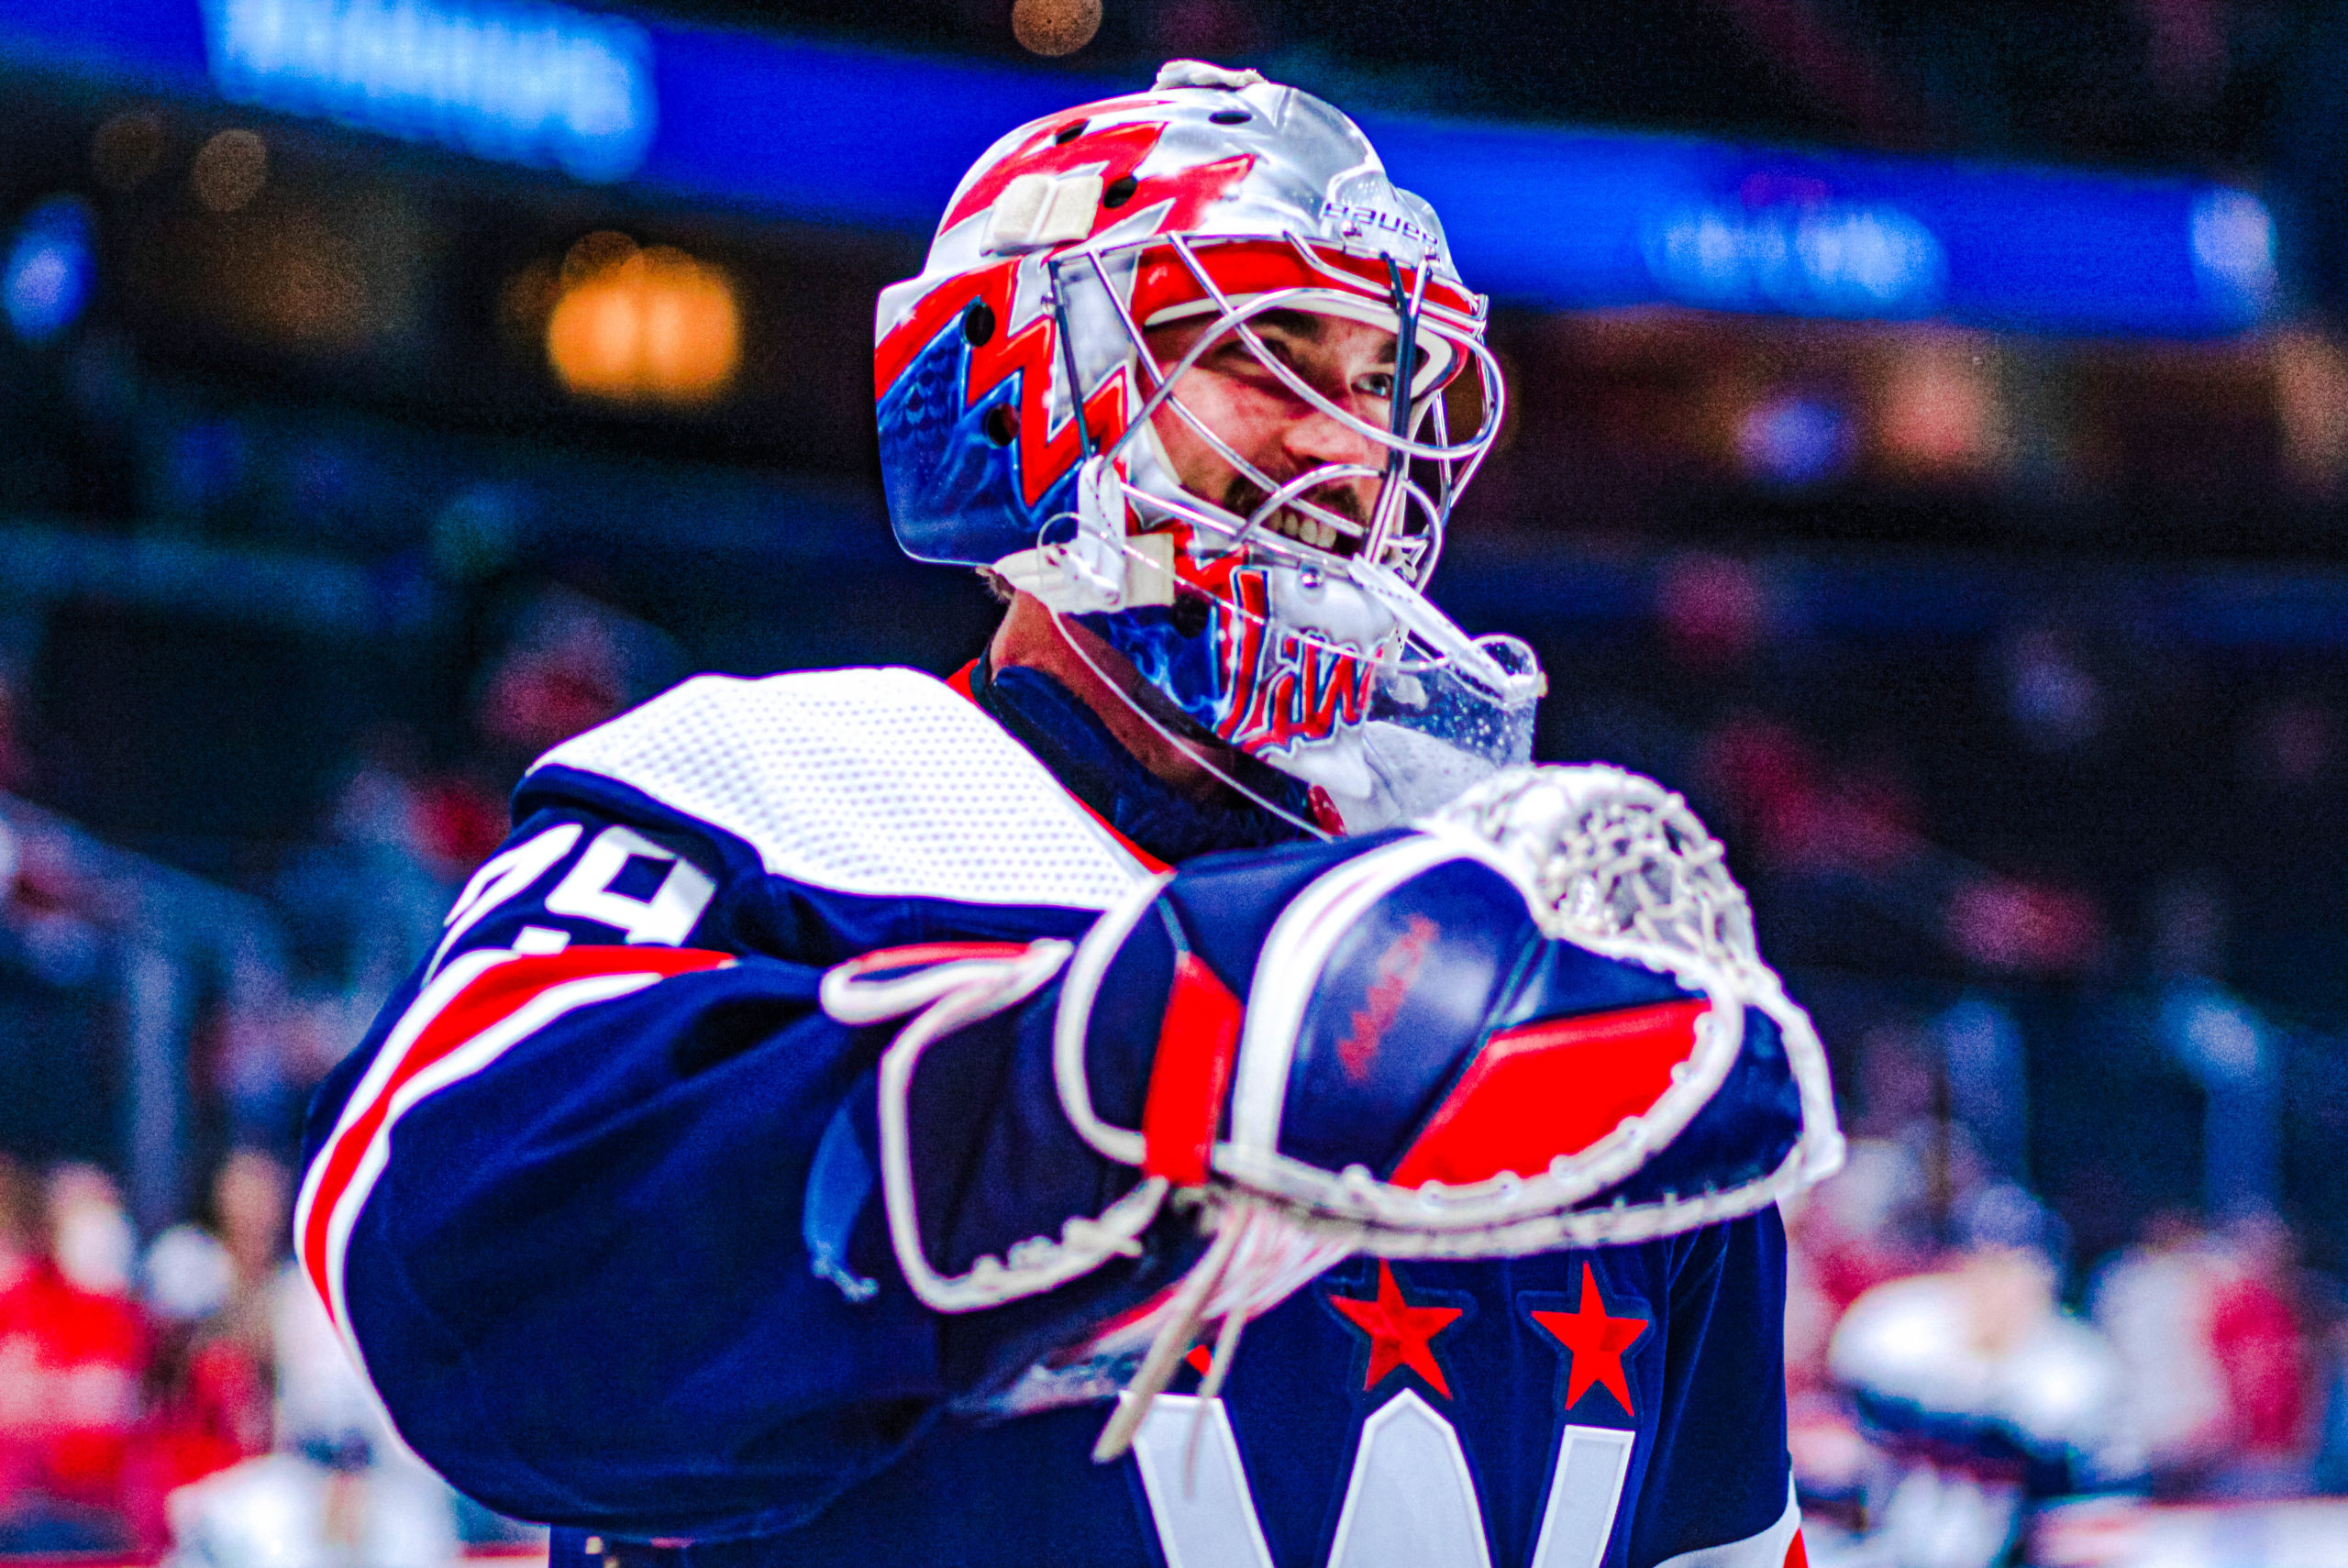 Lindgren Lives By Quote On His Mask, Has ‘Lion’ Mindset With Capitals